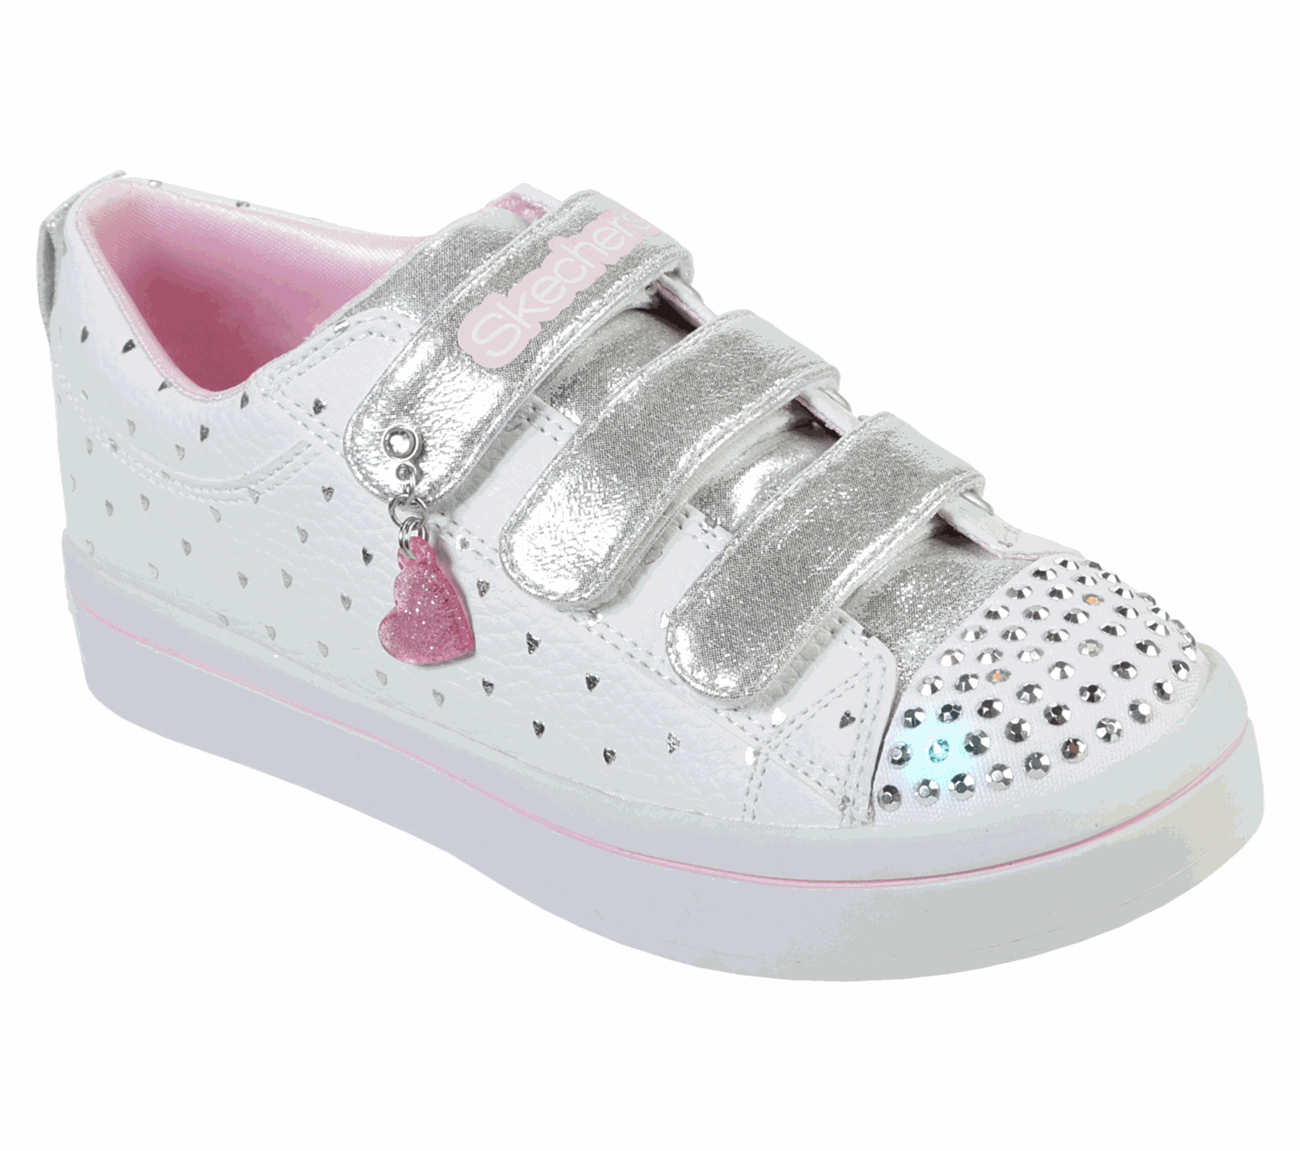 twinkle toes size 8 toddler